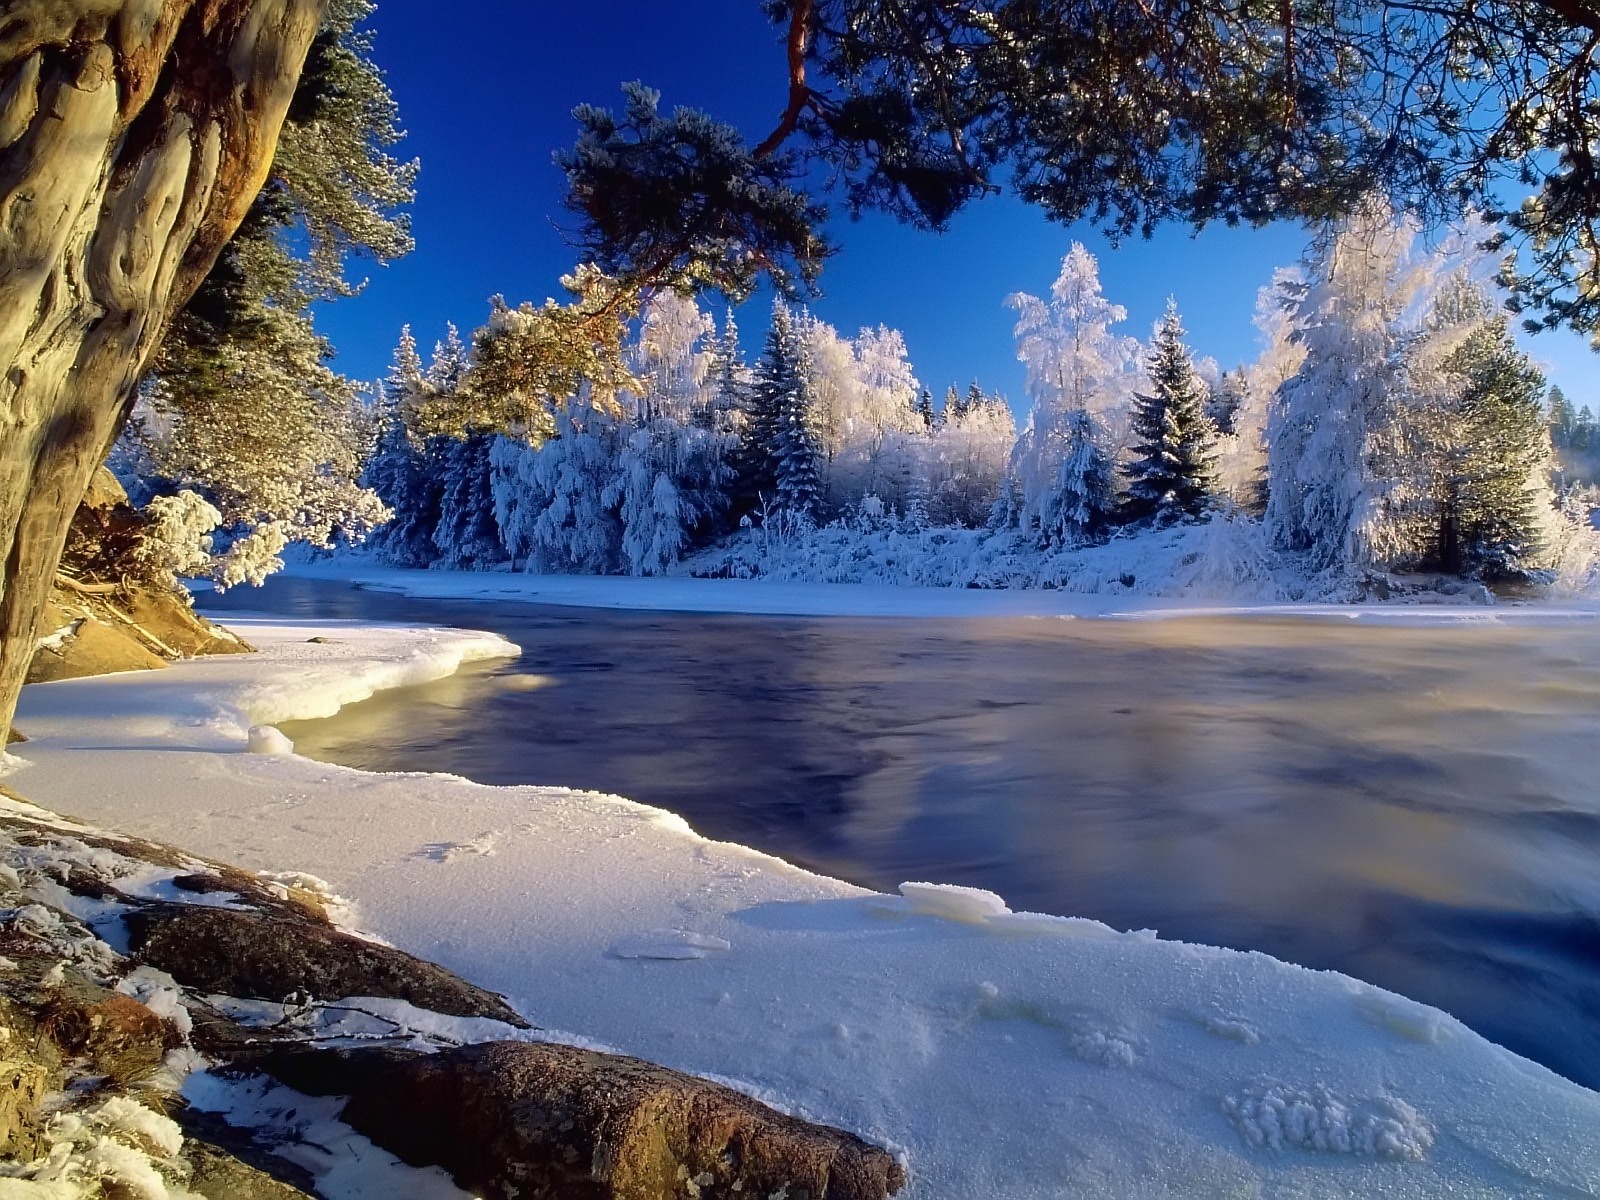 Icy river Wallpaper Winter Nature Wallpapers in jpg format for 